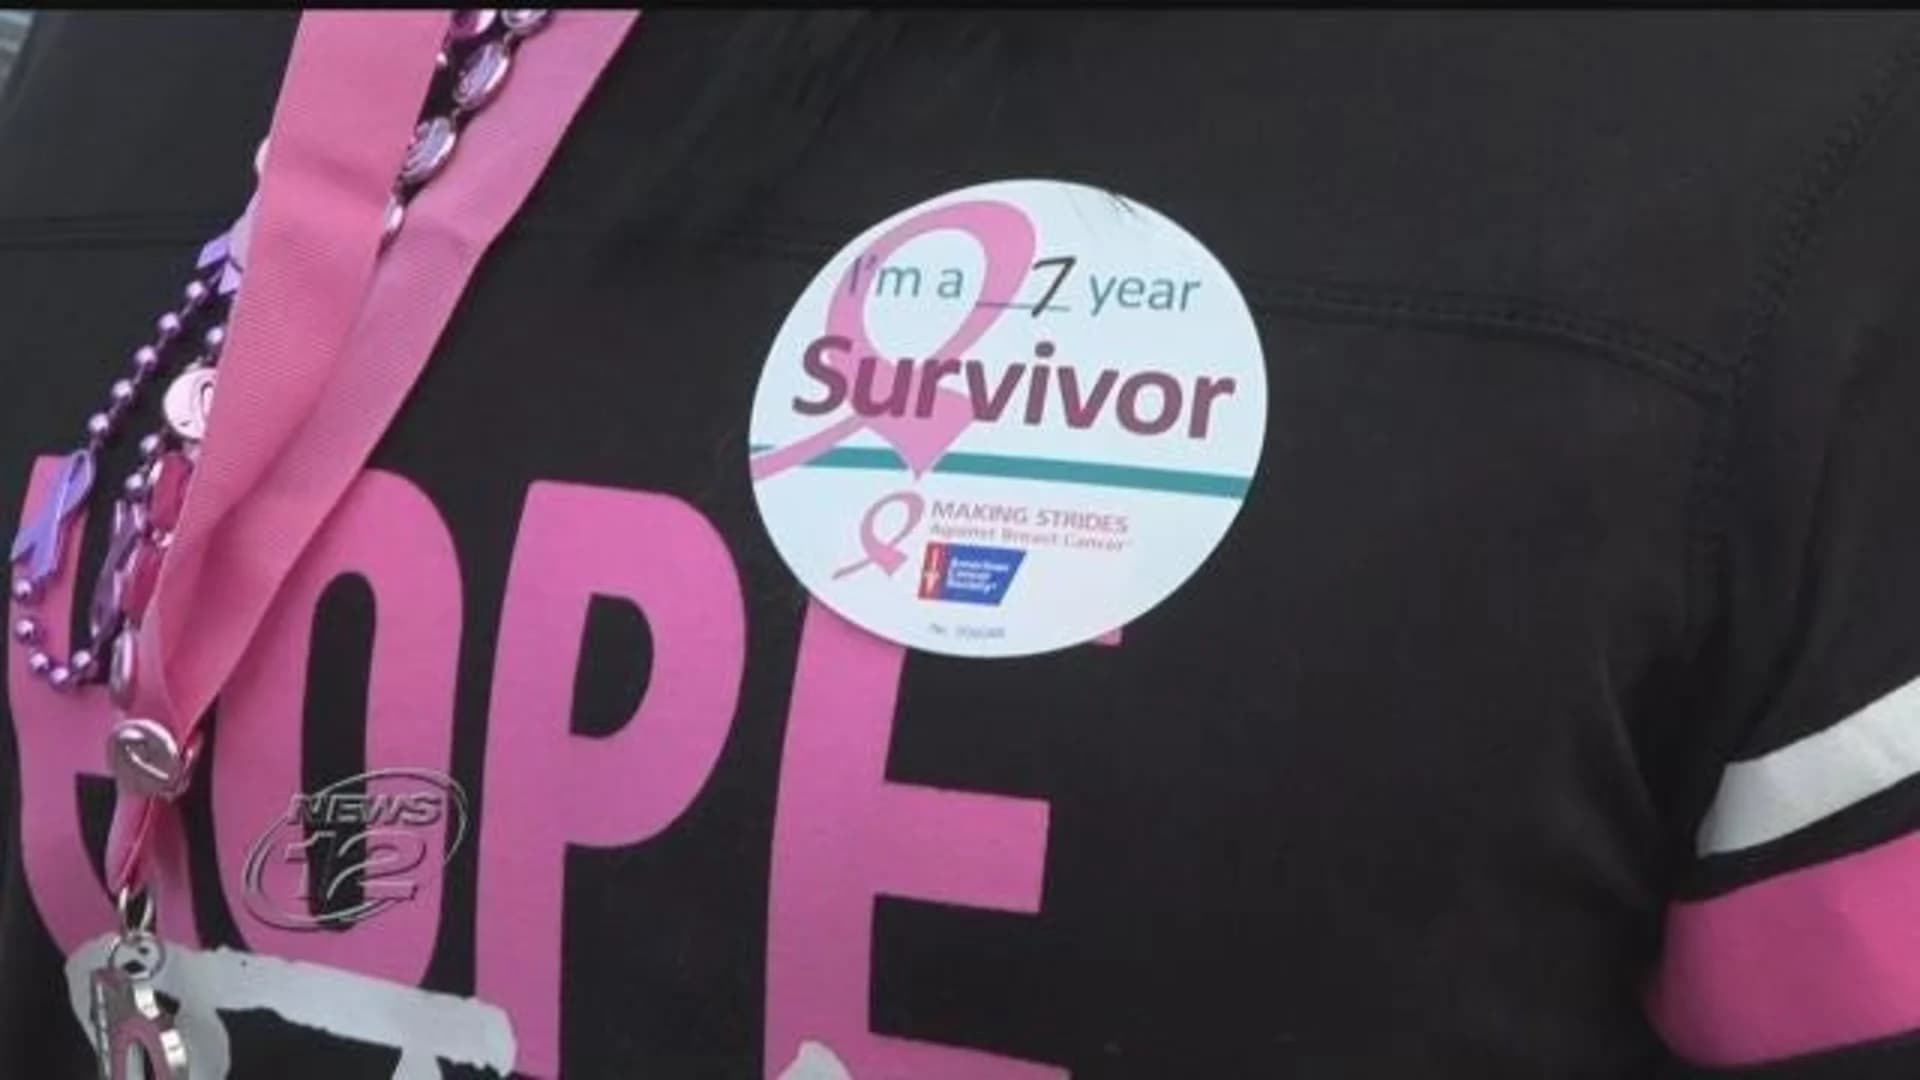 Tens of thousands walk to find breast cancer cure at Jones Beach